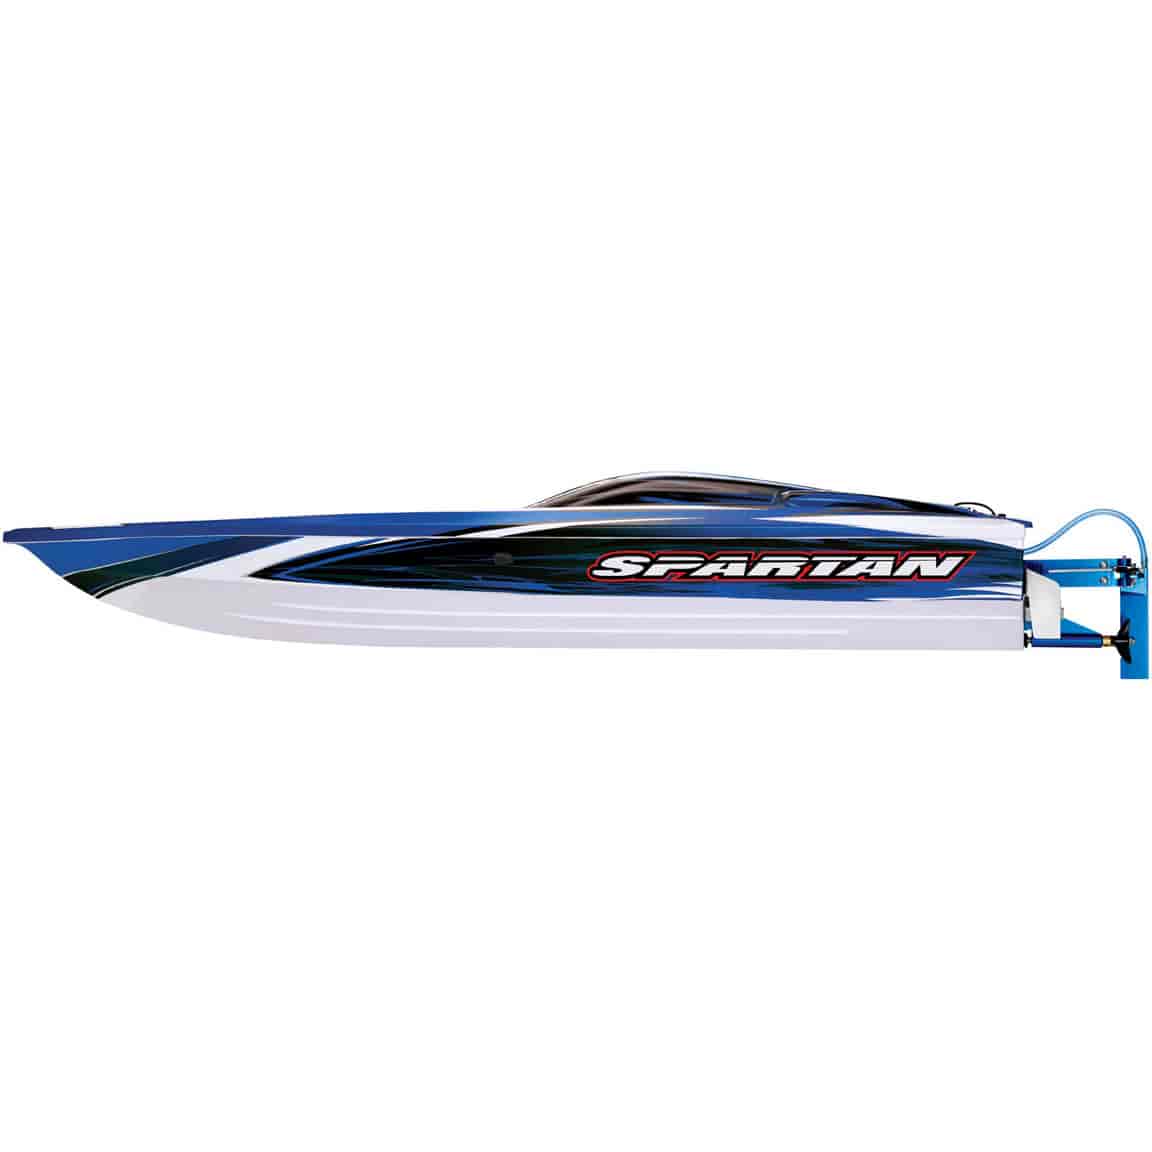 *USED - Spartan Brushless Race Boat Fully Assembled, Ready-To-Race 50+ MPH